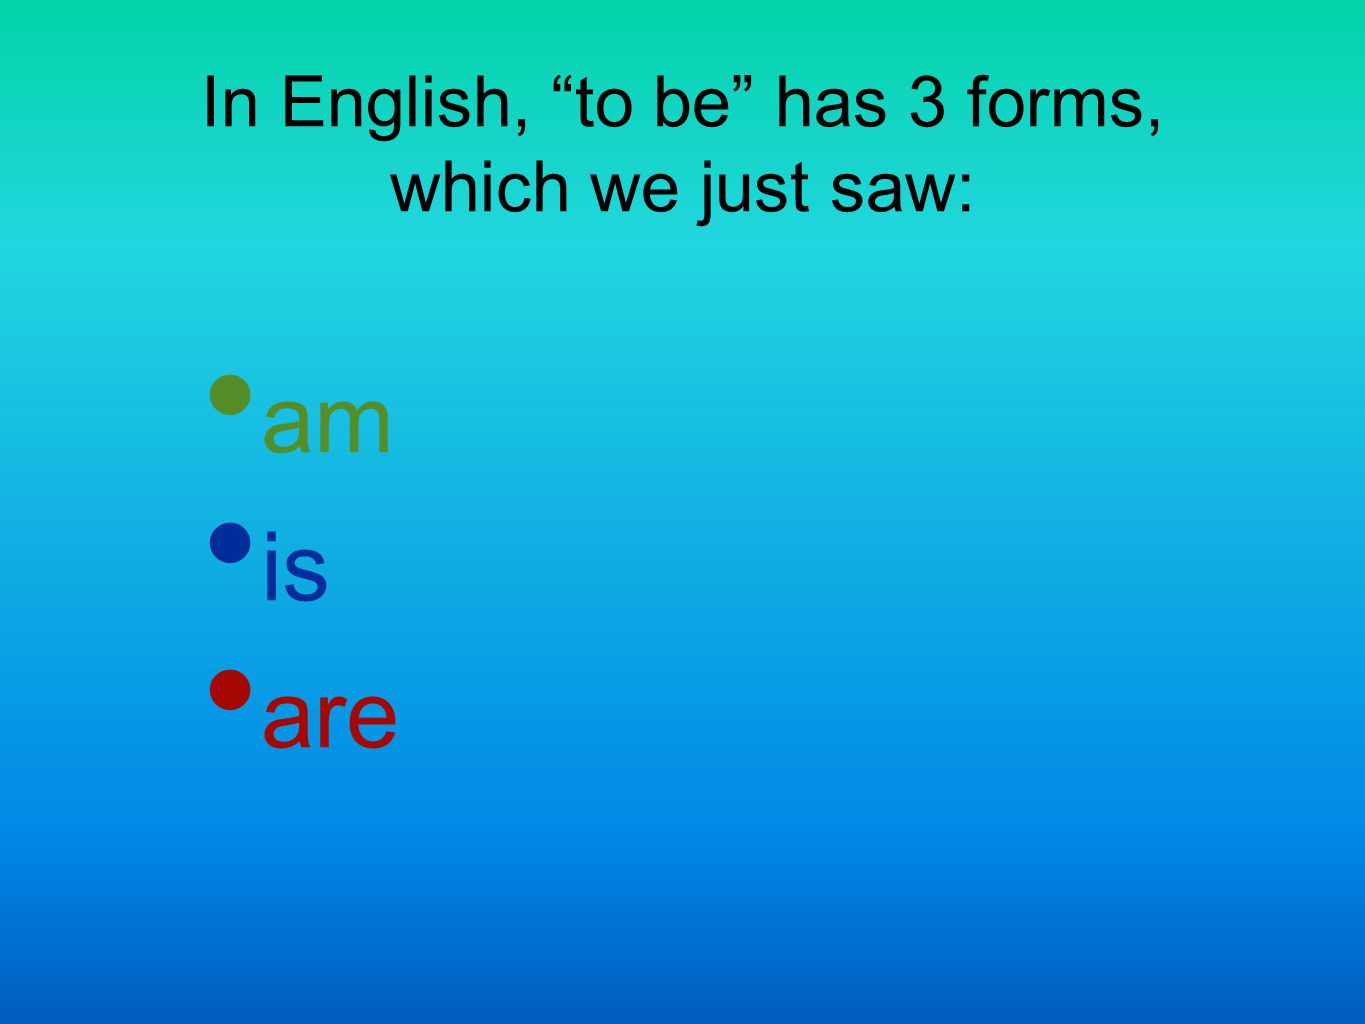 In English, to be has 3 forms, which we just saw: am is are